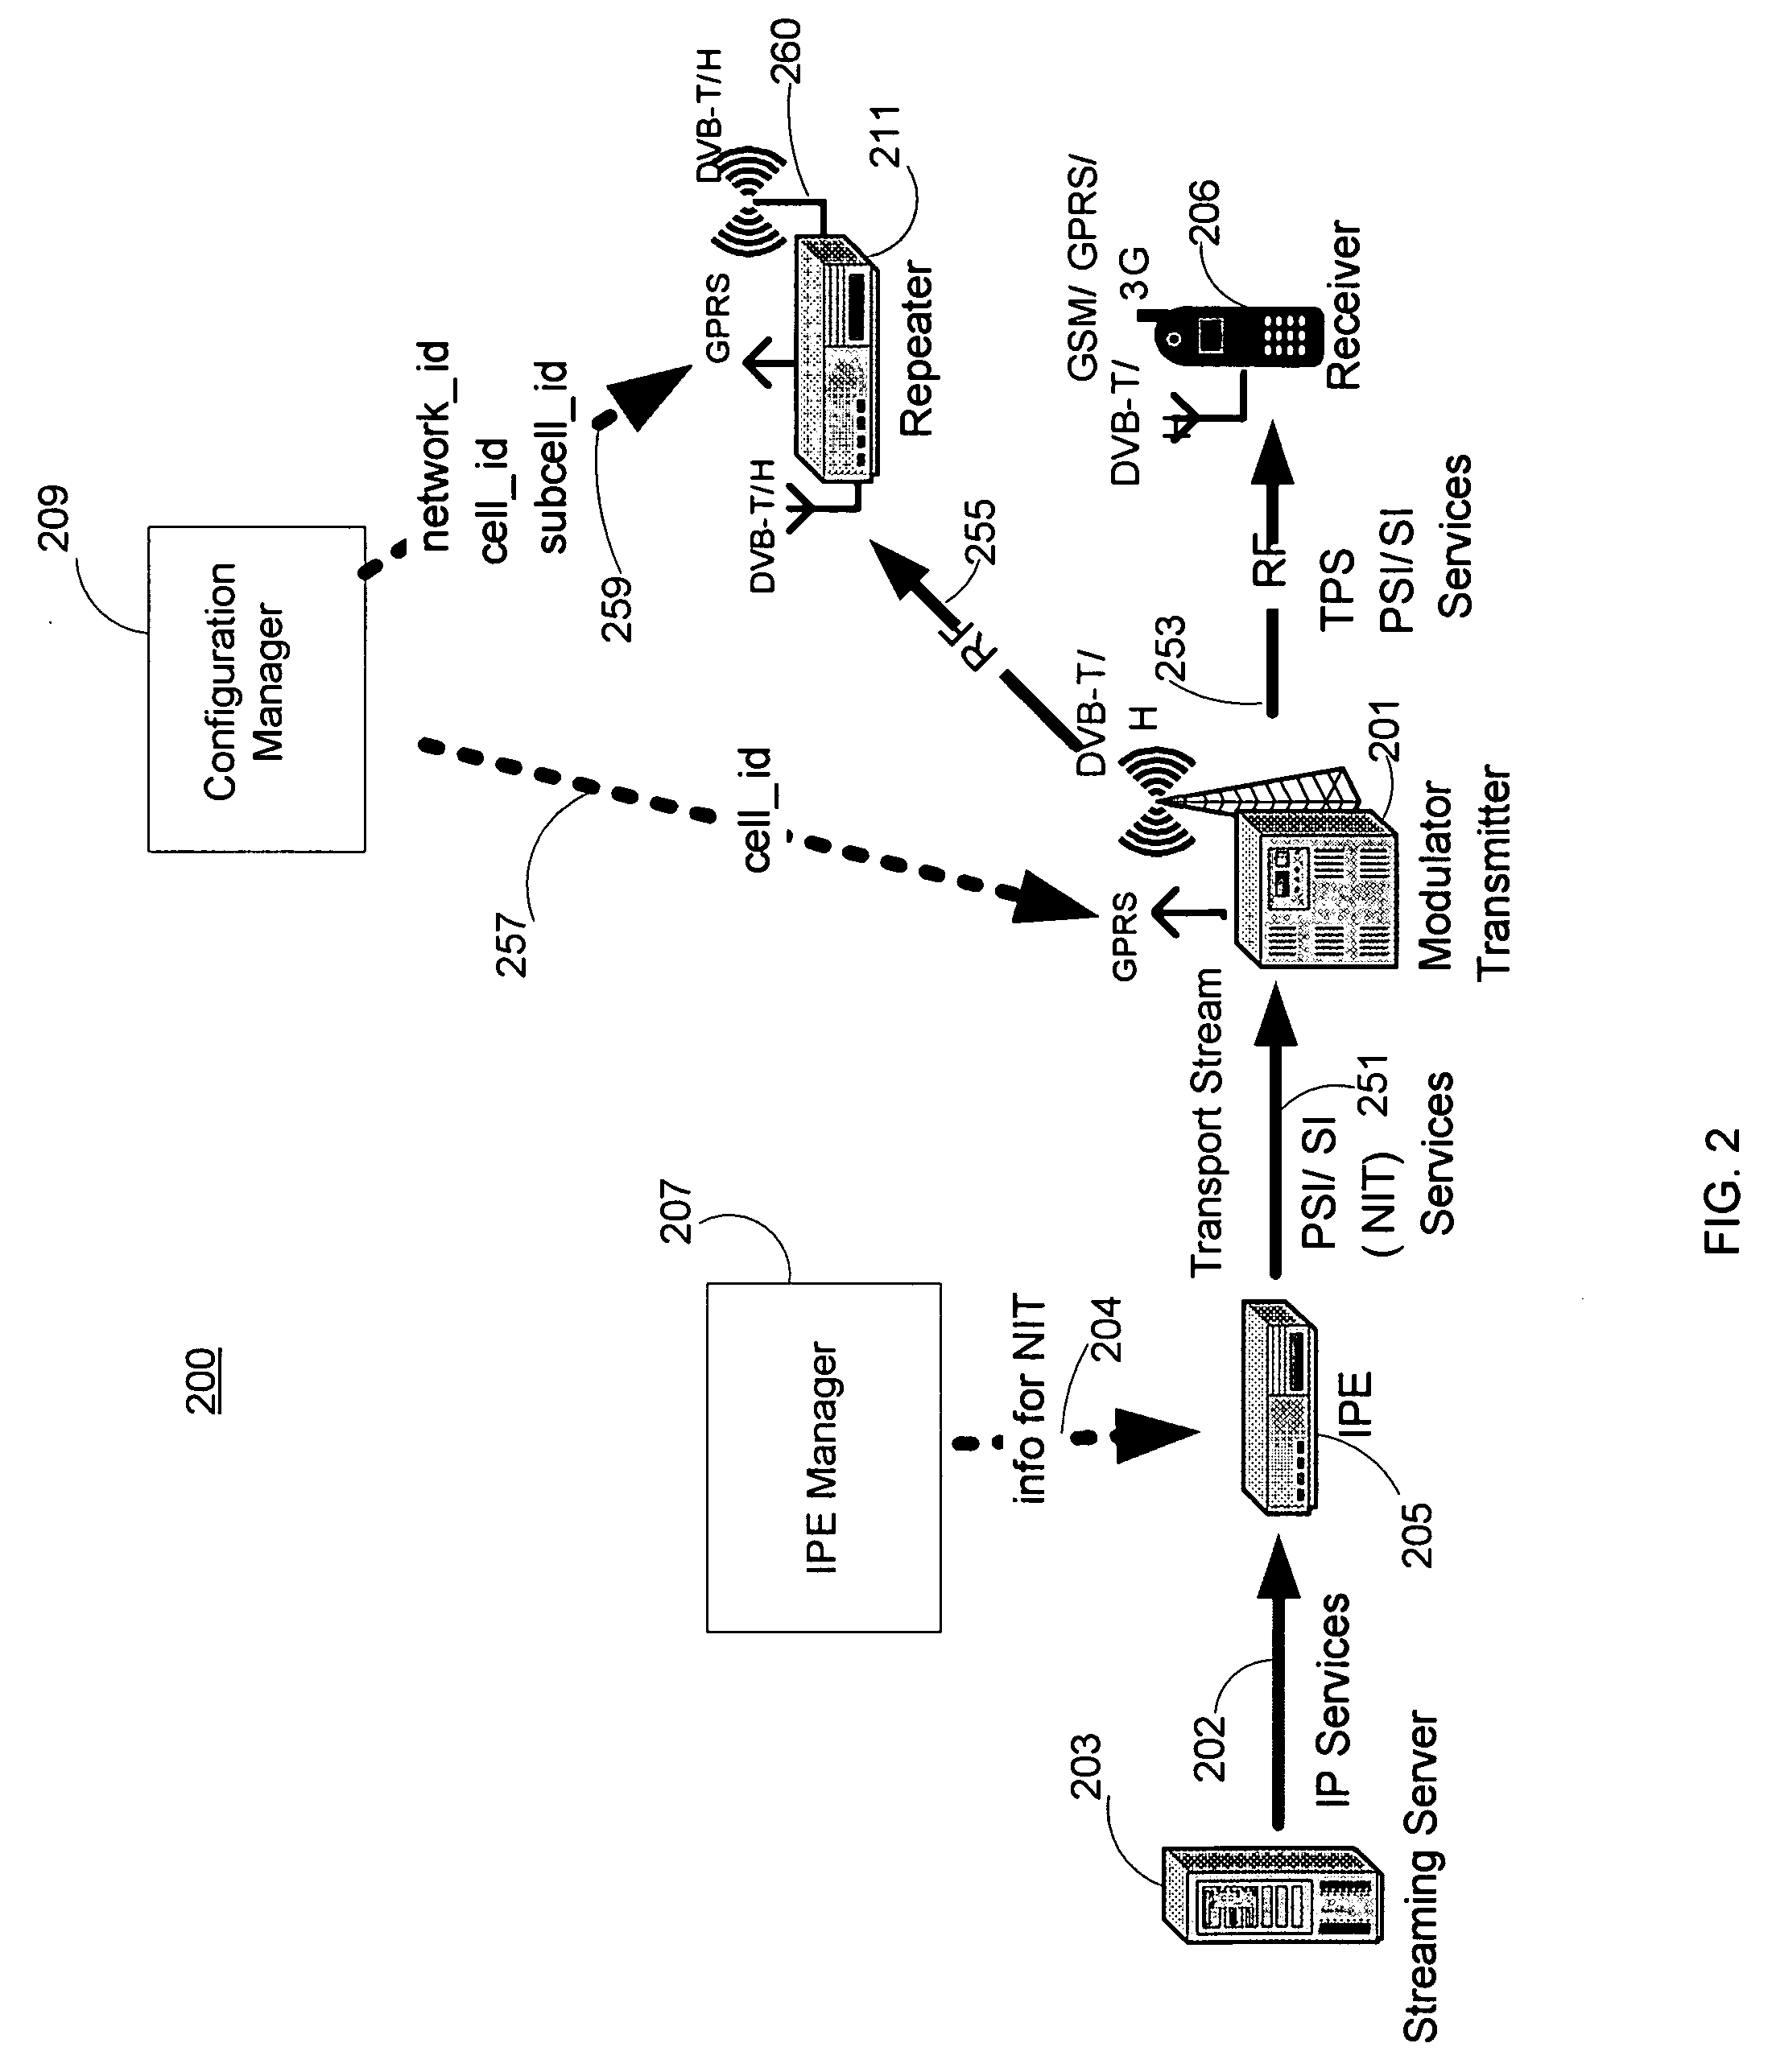 Use of signaling for auto-configuration of modulators and repeaters